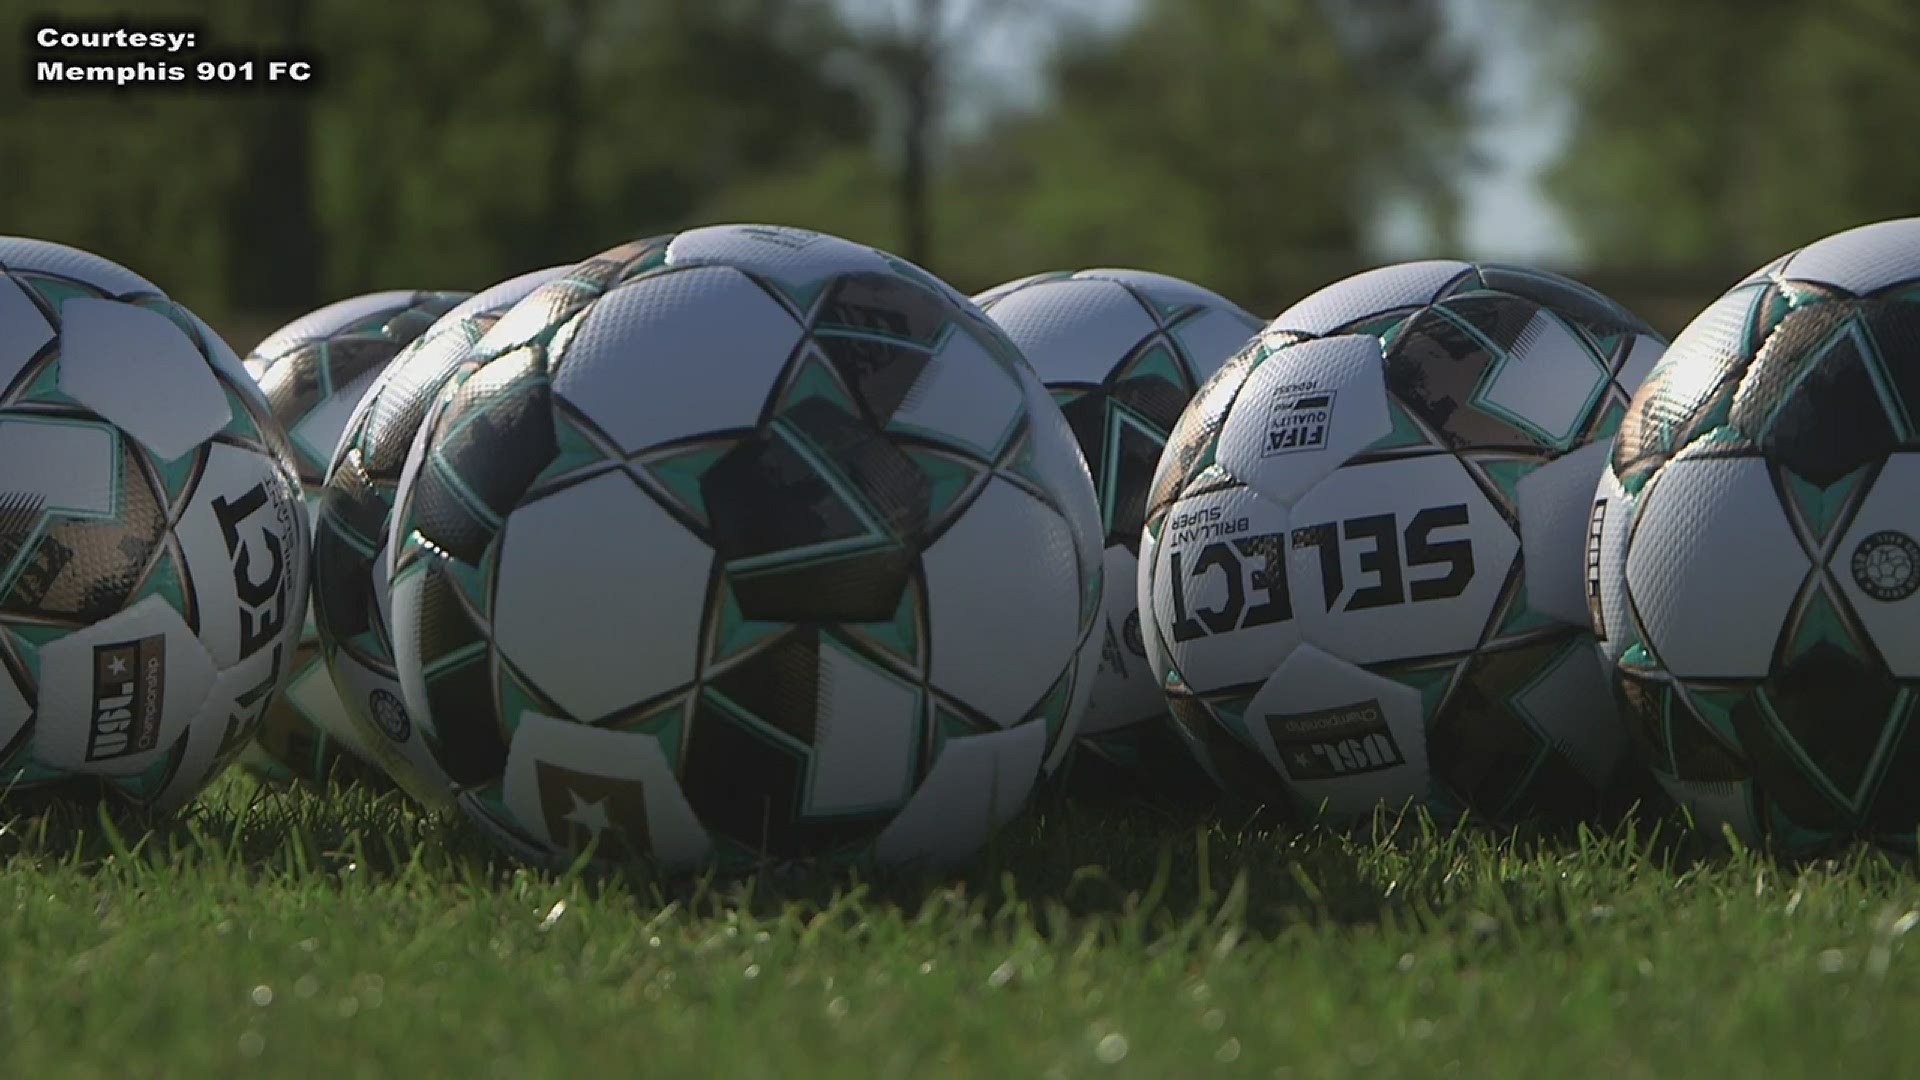 901 FC plays first match May 15, home opener June 16